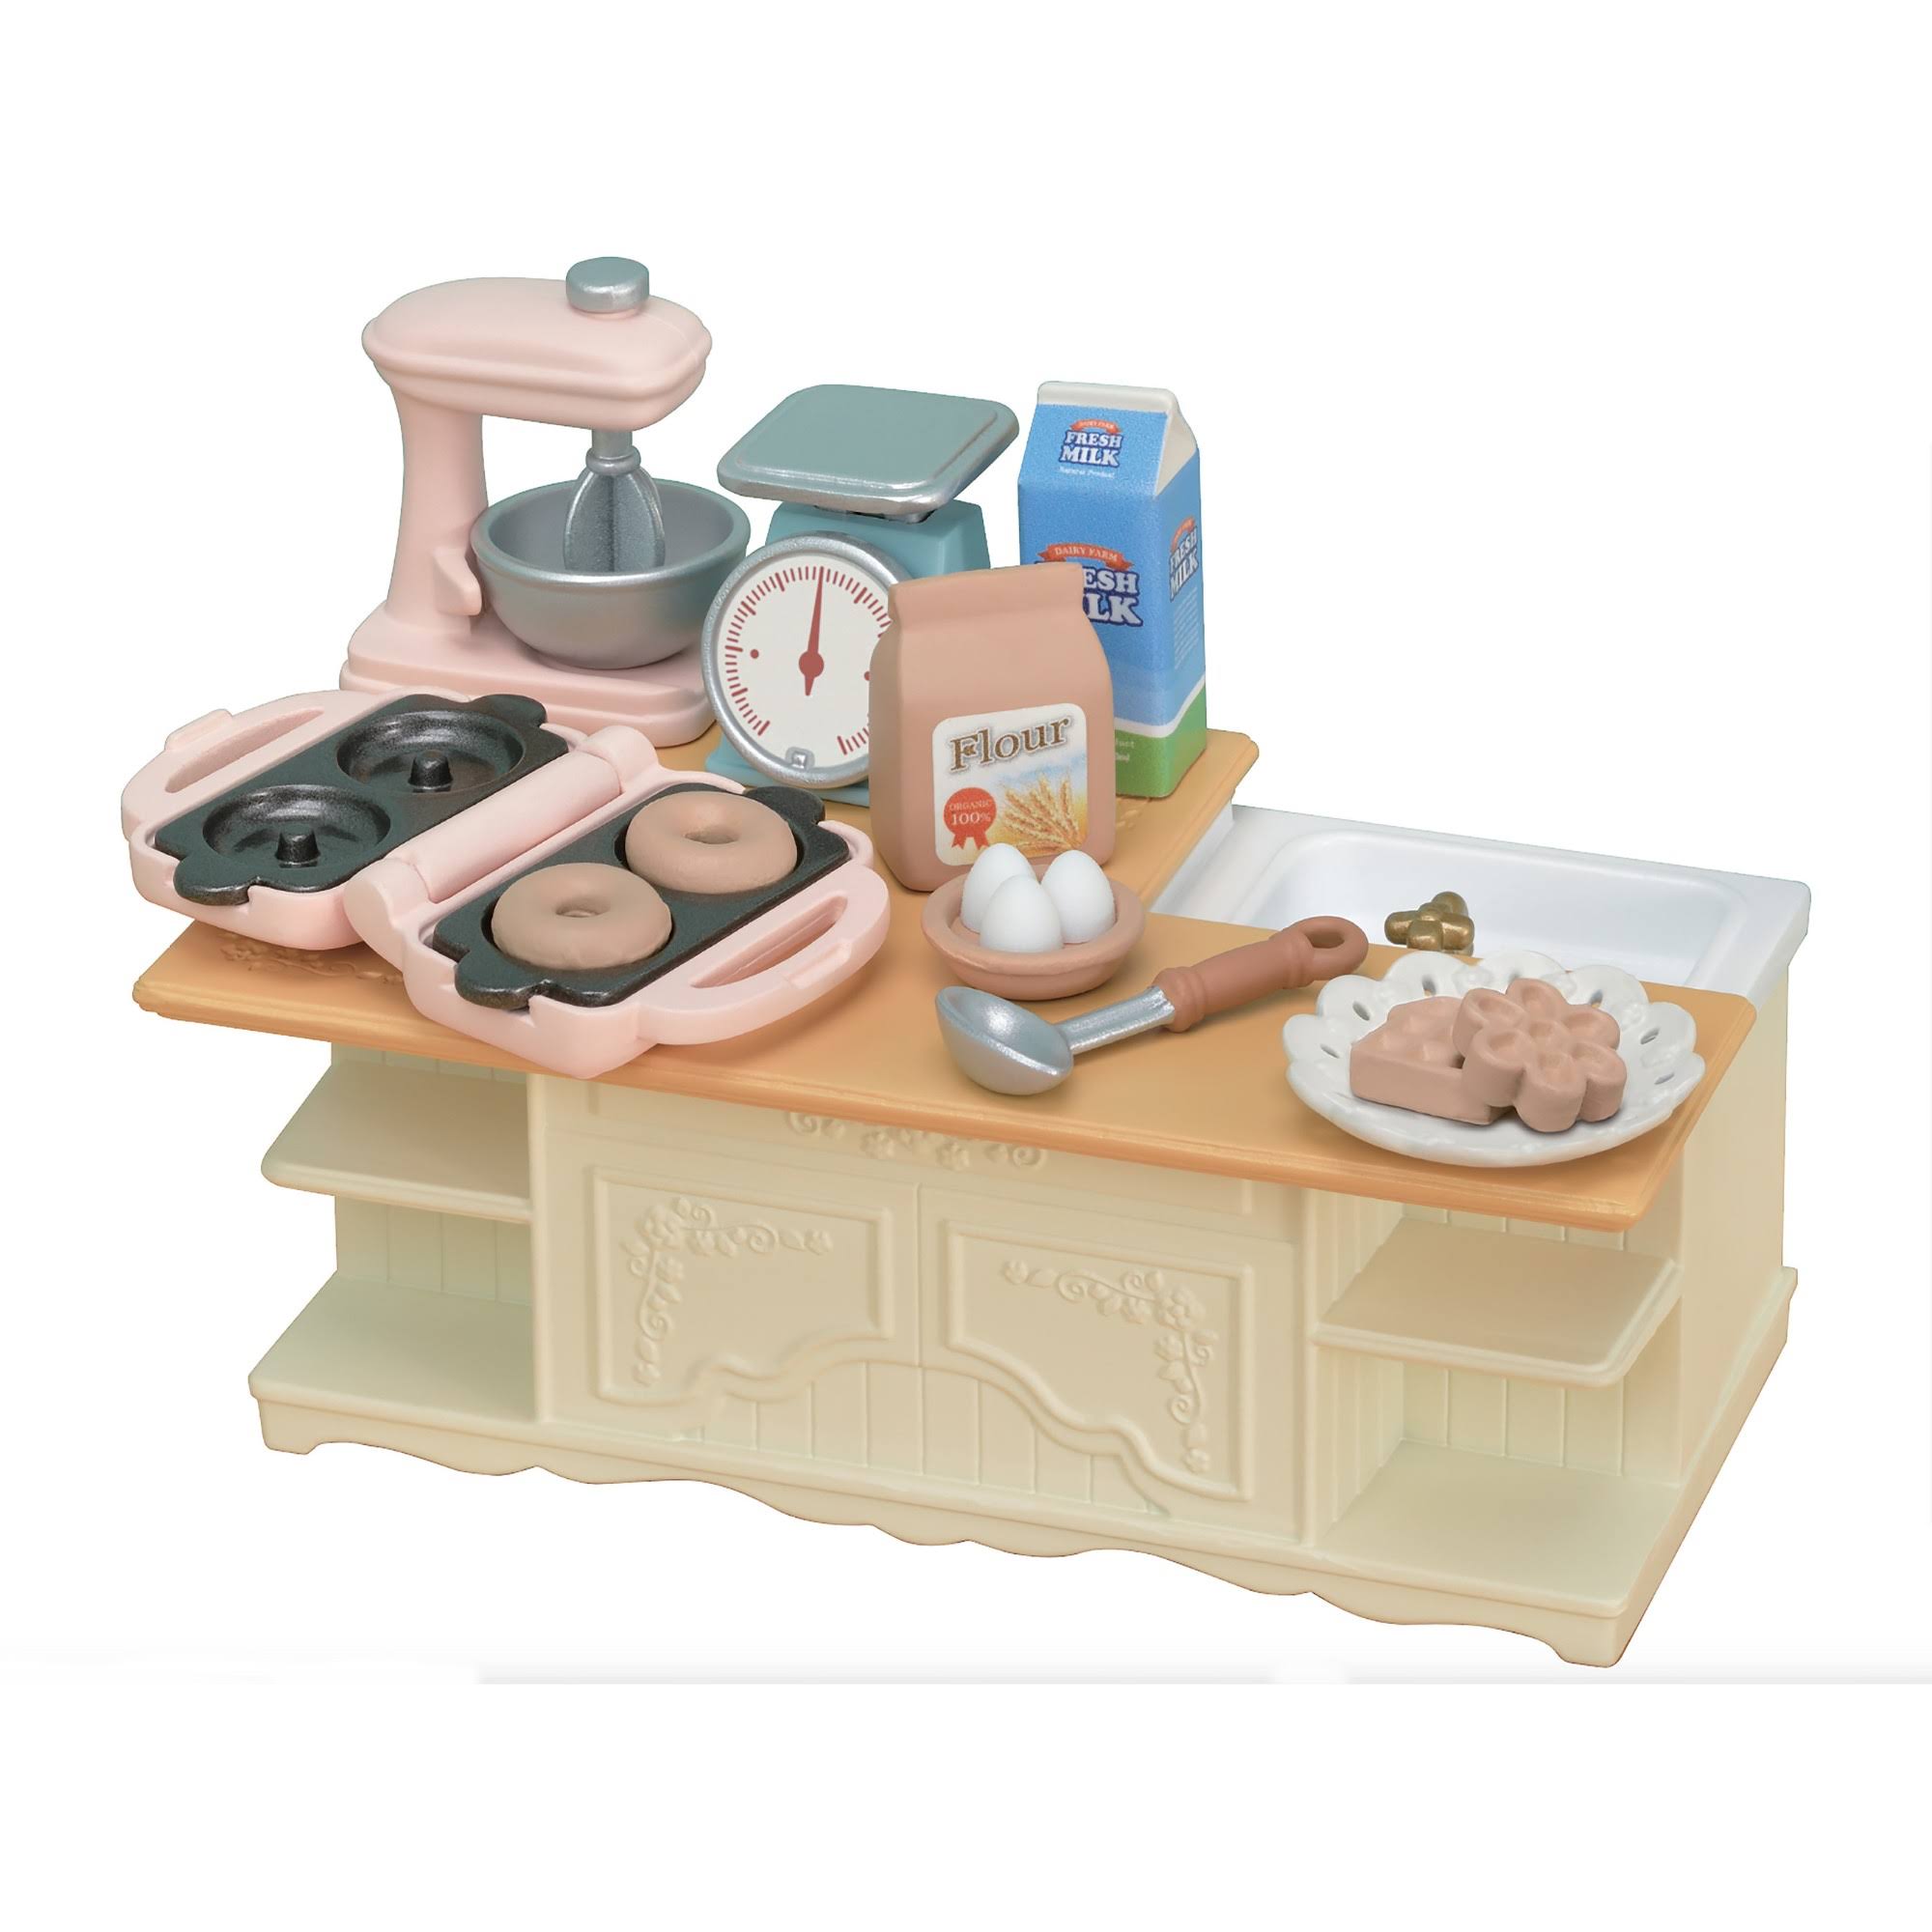 Calico Critters Kitchen Island, Dollhouse Furniture and Accessories